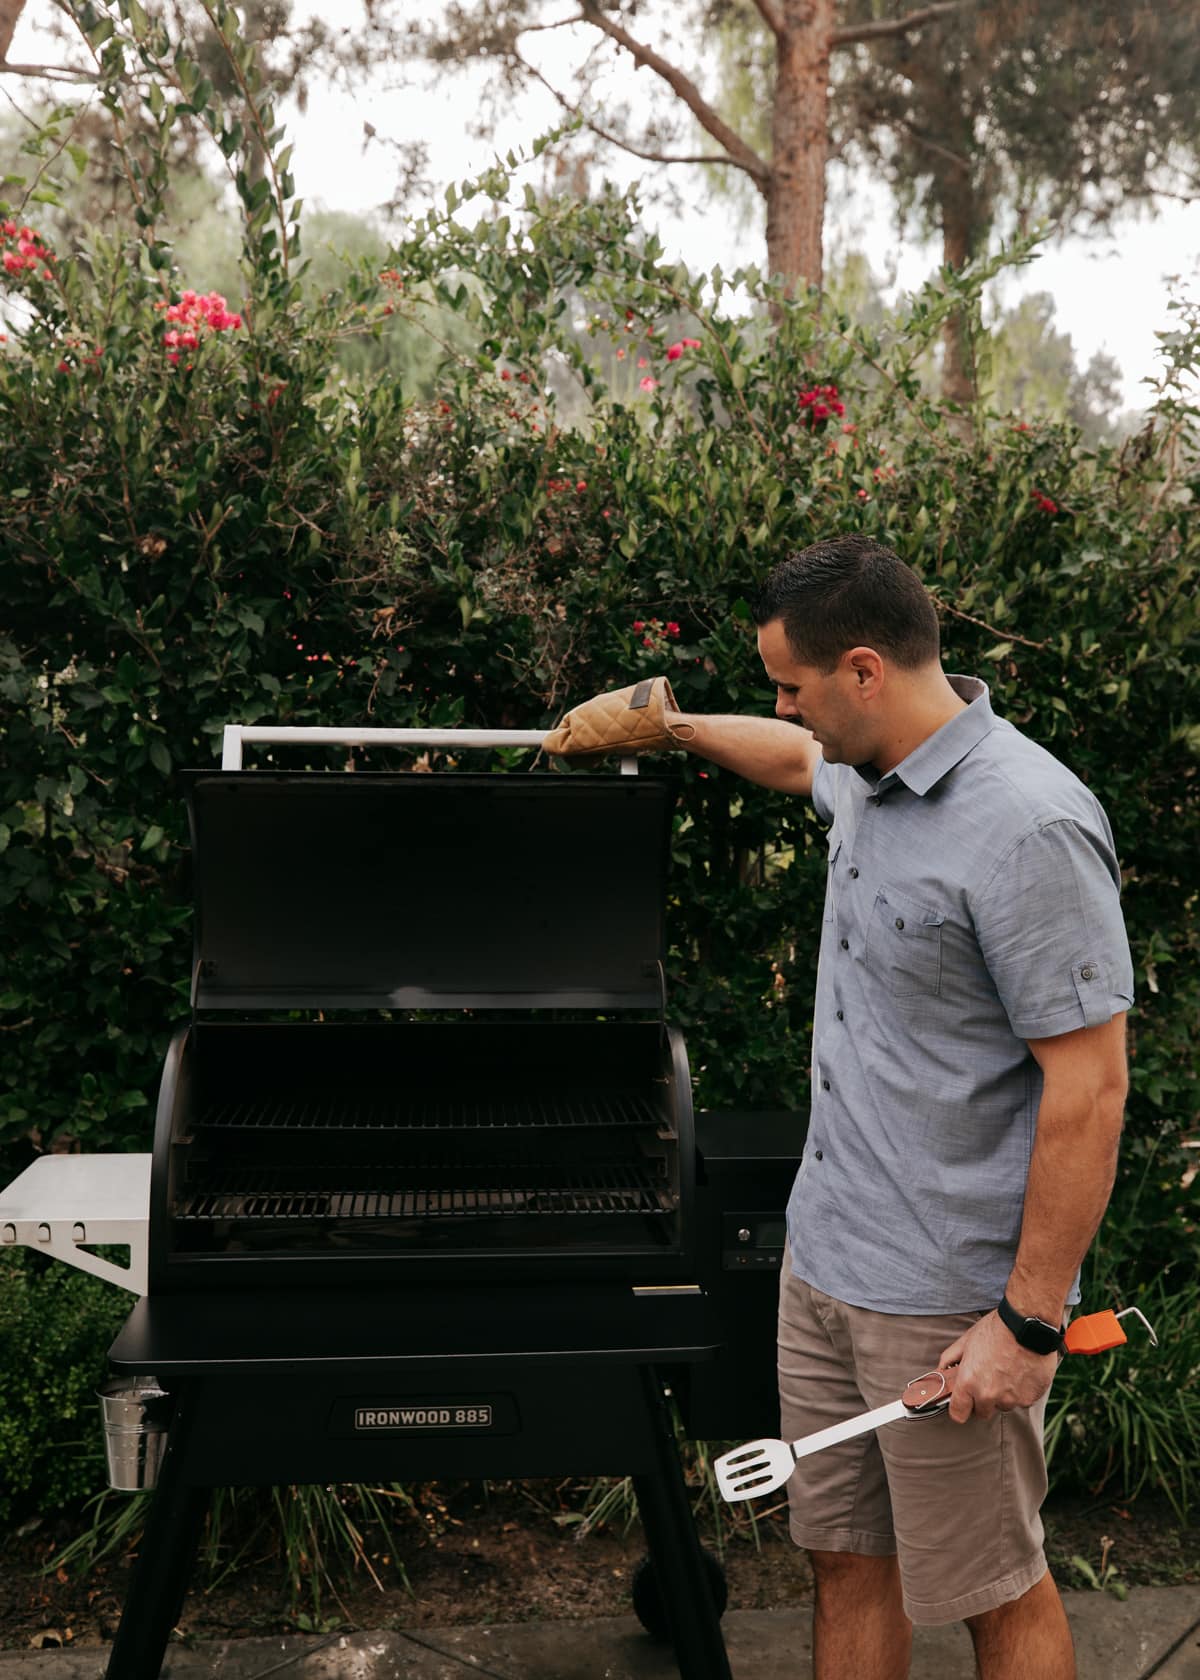 Traeger's pellet grill can smoke, sear, and more at its second-best price  of the year, now $625